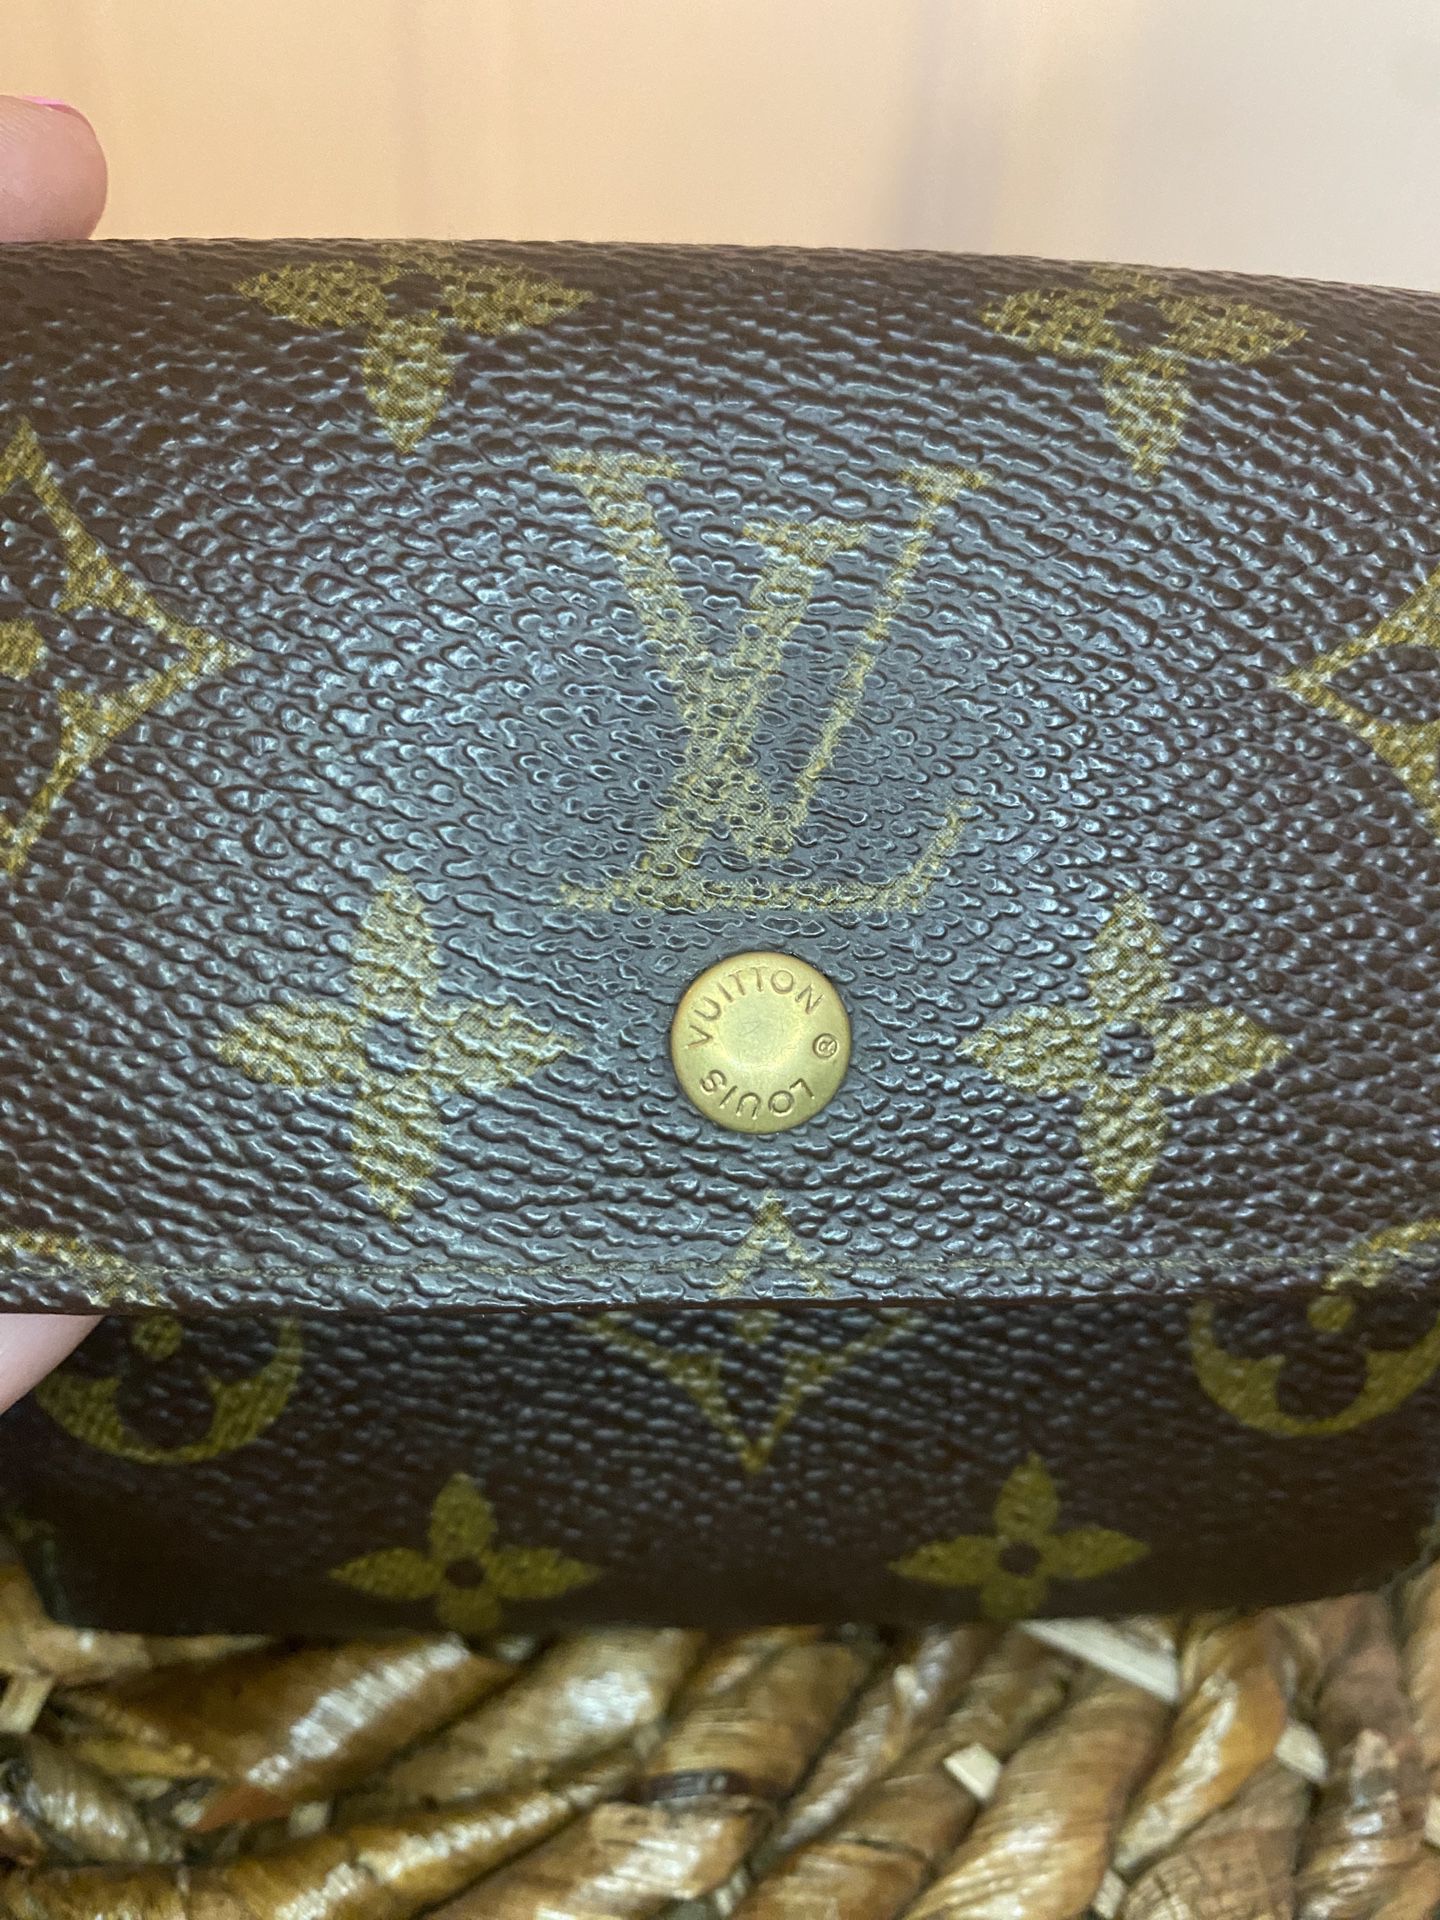 Louis Vuitton Authentic Victorine Wallet for Sale in Tracy, CA - OfferUp